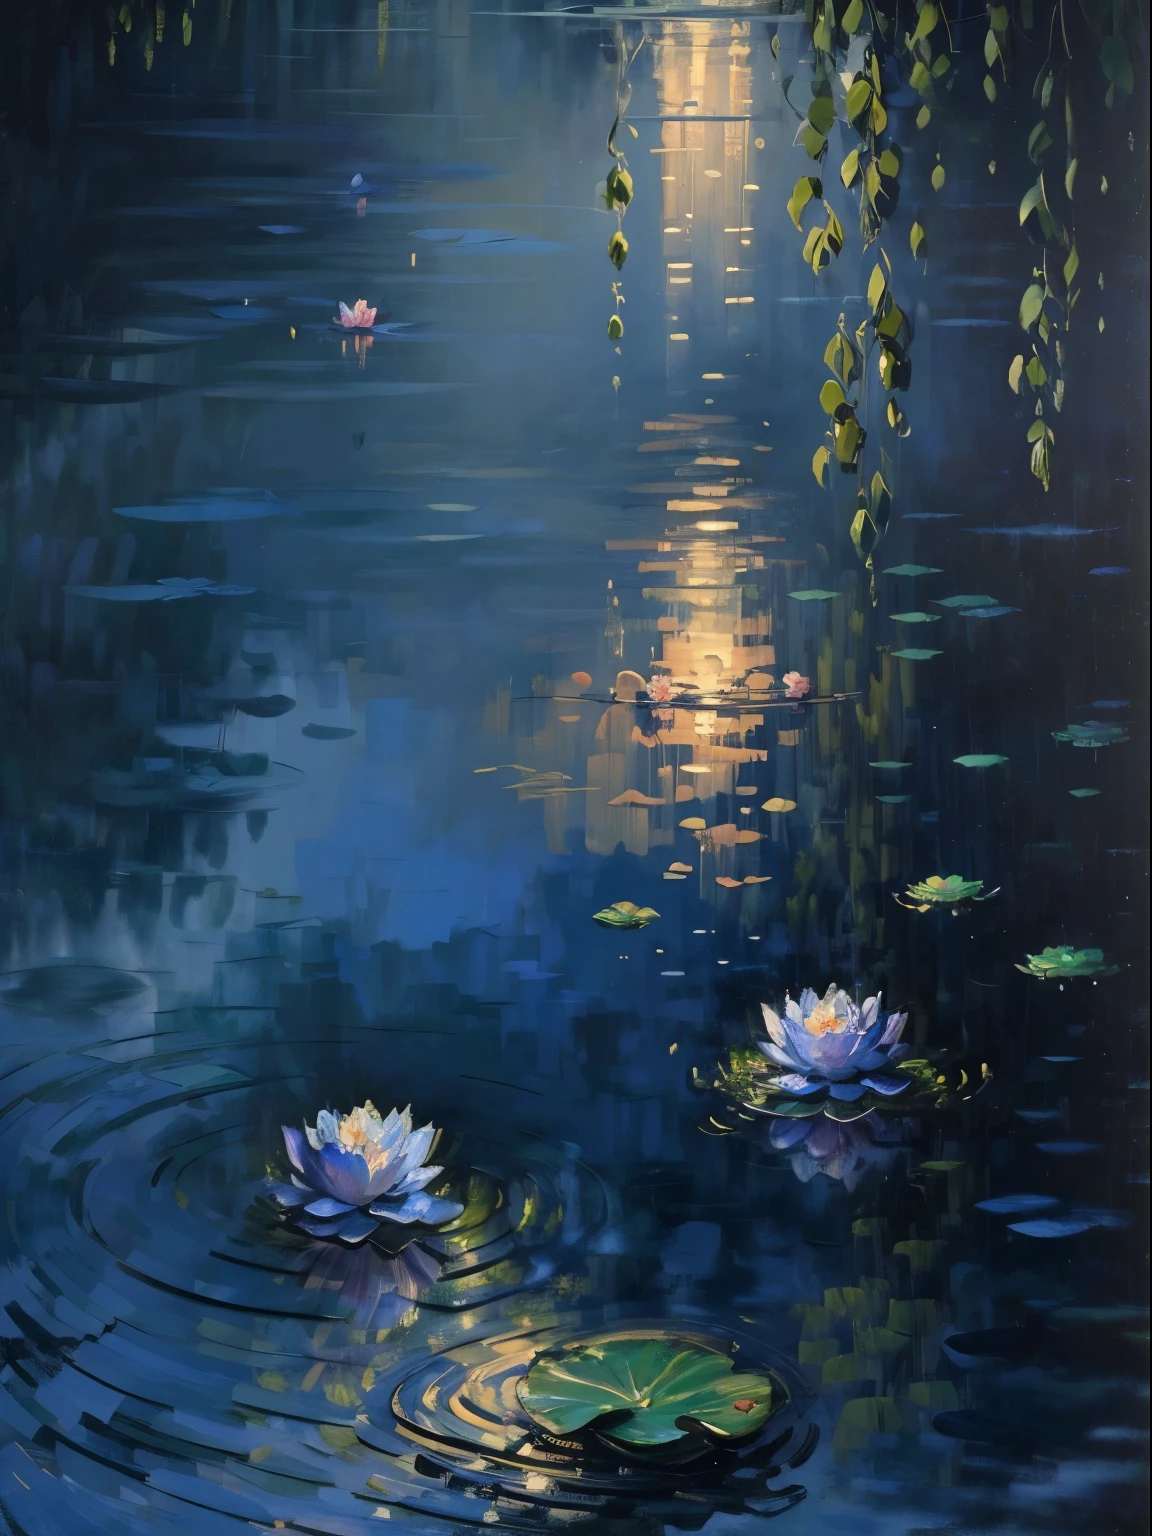 Monet's oil paintings，(highest quality,4K,8k,High resolution,masterpiece:1.2),Very detailed,Realistic,Beautiful moonlit lotus pond,Peaceful atmosphere,Reflected on the still water,Lush lotus leaves,Fragrant lotus flowers blooming,Detailed water ripples,Lotus grower silhouette,Gentle night breeze,Quiet atmosphere,The soft moonlight illuminated the scene.,A subtle play of light and shadow,Midnight blue and silver harmonious color,Impressionist painting style,Tranquil natural beauty,Poetic and nostalgic,Romantic atmosphere,The beauty of moonlit silence,Fantastic and dreamy,Delicate petals in the moonlight,Gentle and graceful,Lotus flower blooms.